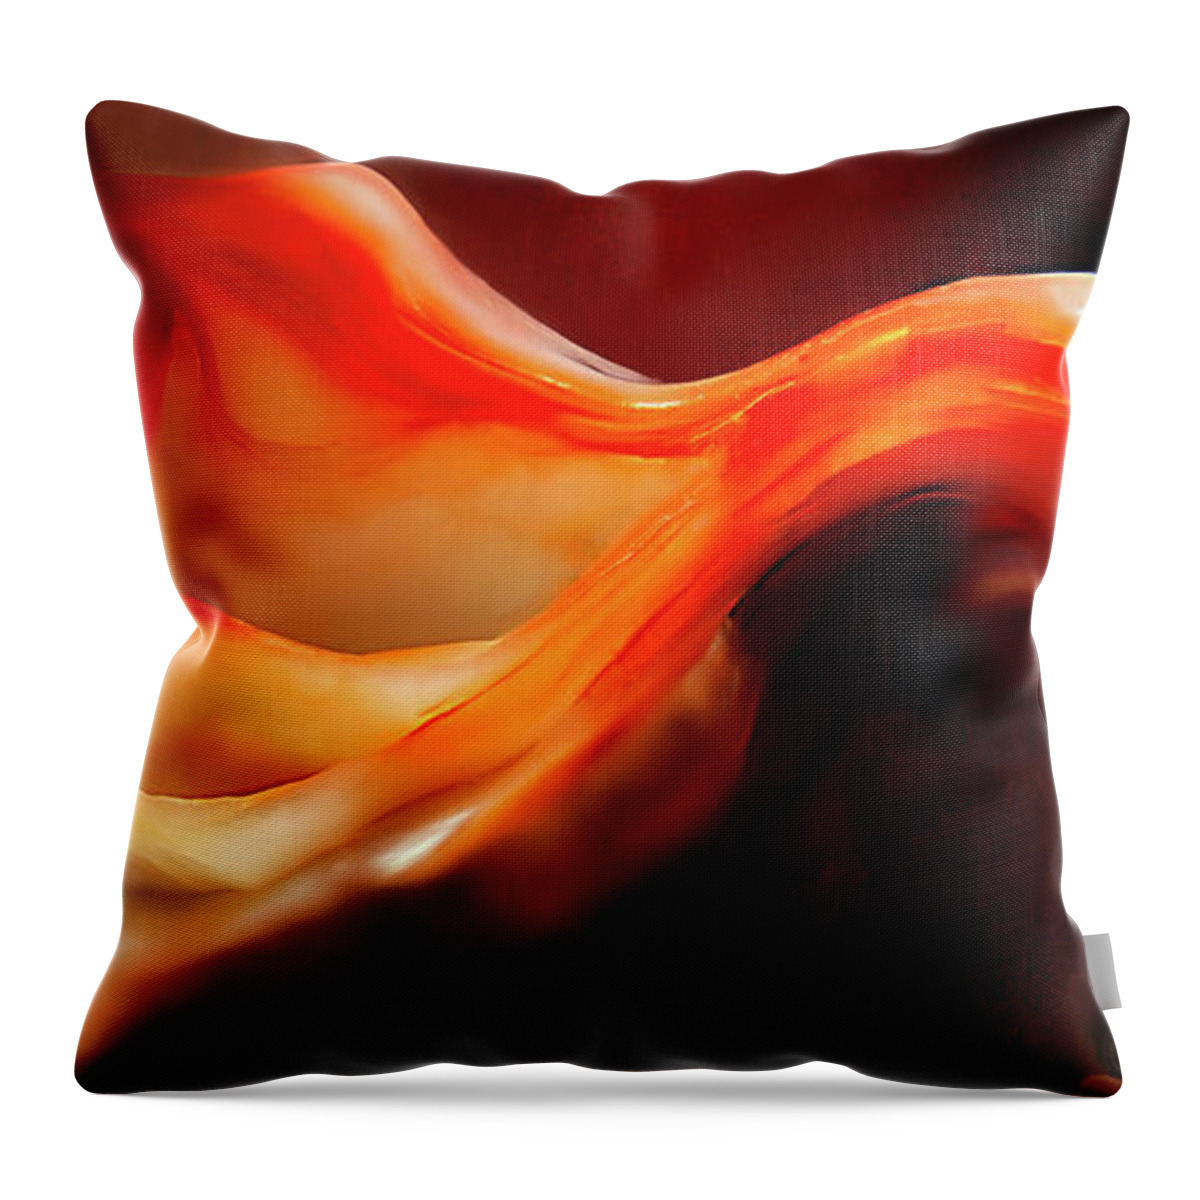 Fine Art Photography Throw Pillow featuring the photograph Ribbons by John Strong